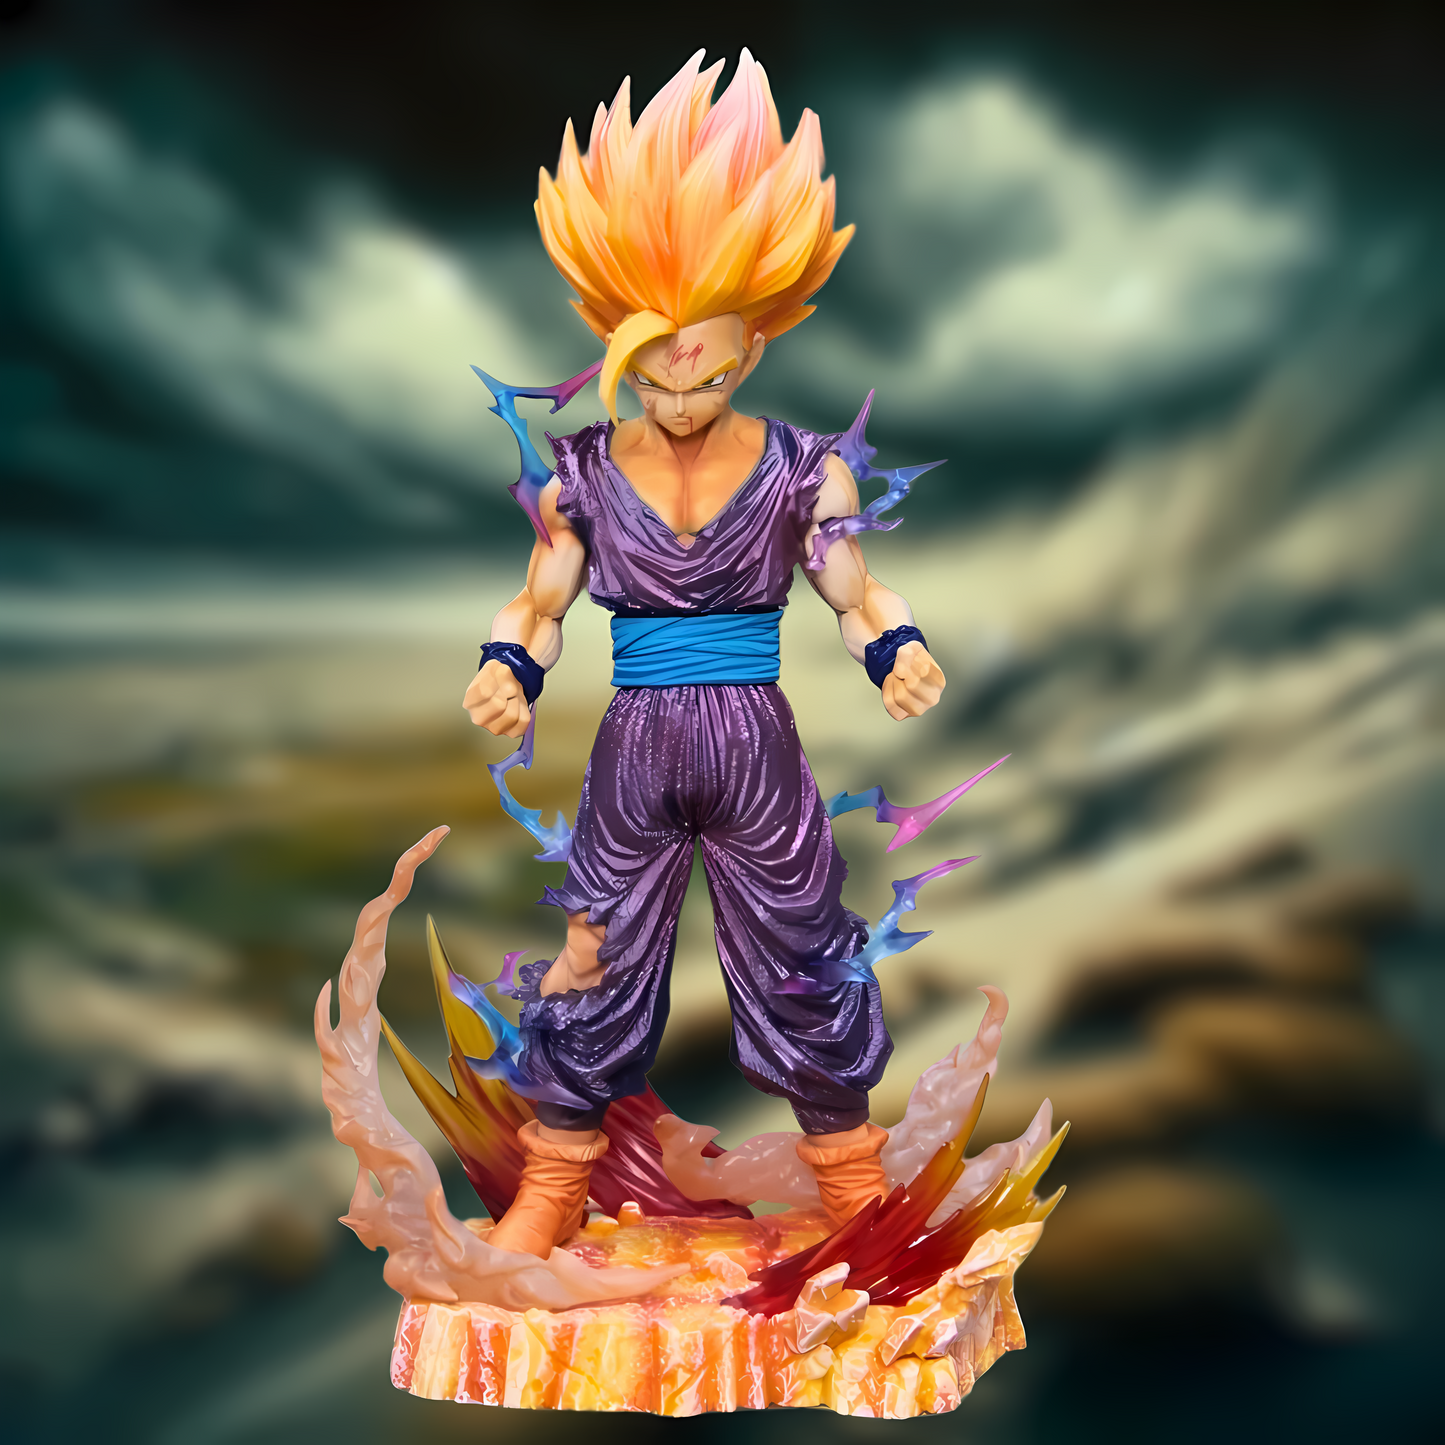 A dynamic collectible figure of Gohan from Dragon Ball with flaming orange hair in Super Saiyan form, poised for battle on a fiery base, against a tempestuous sky background.